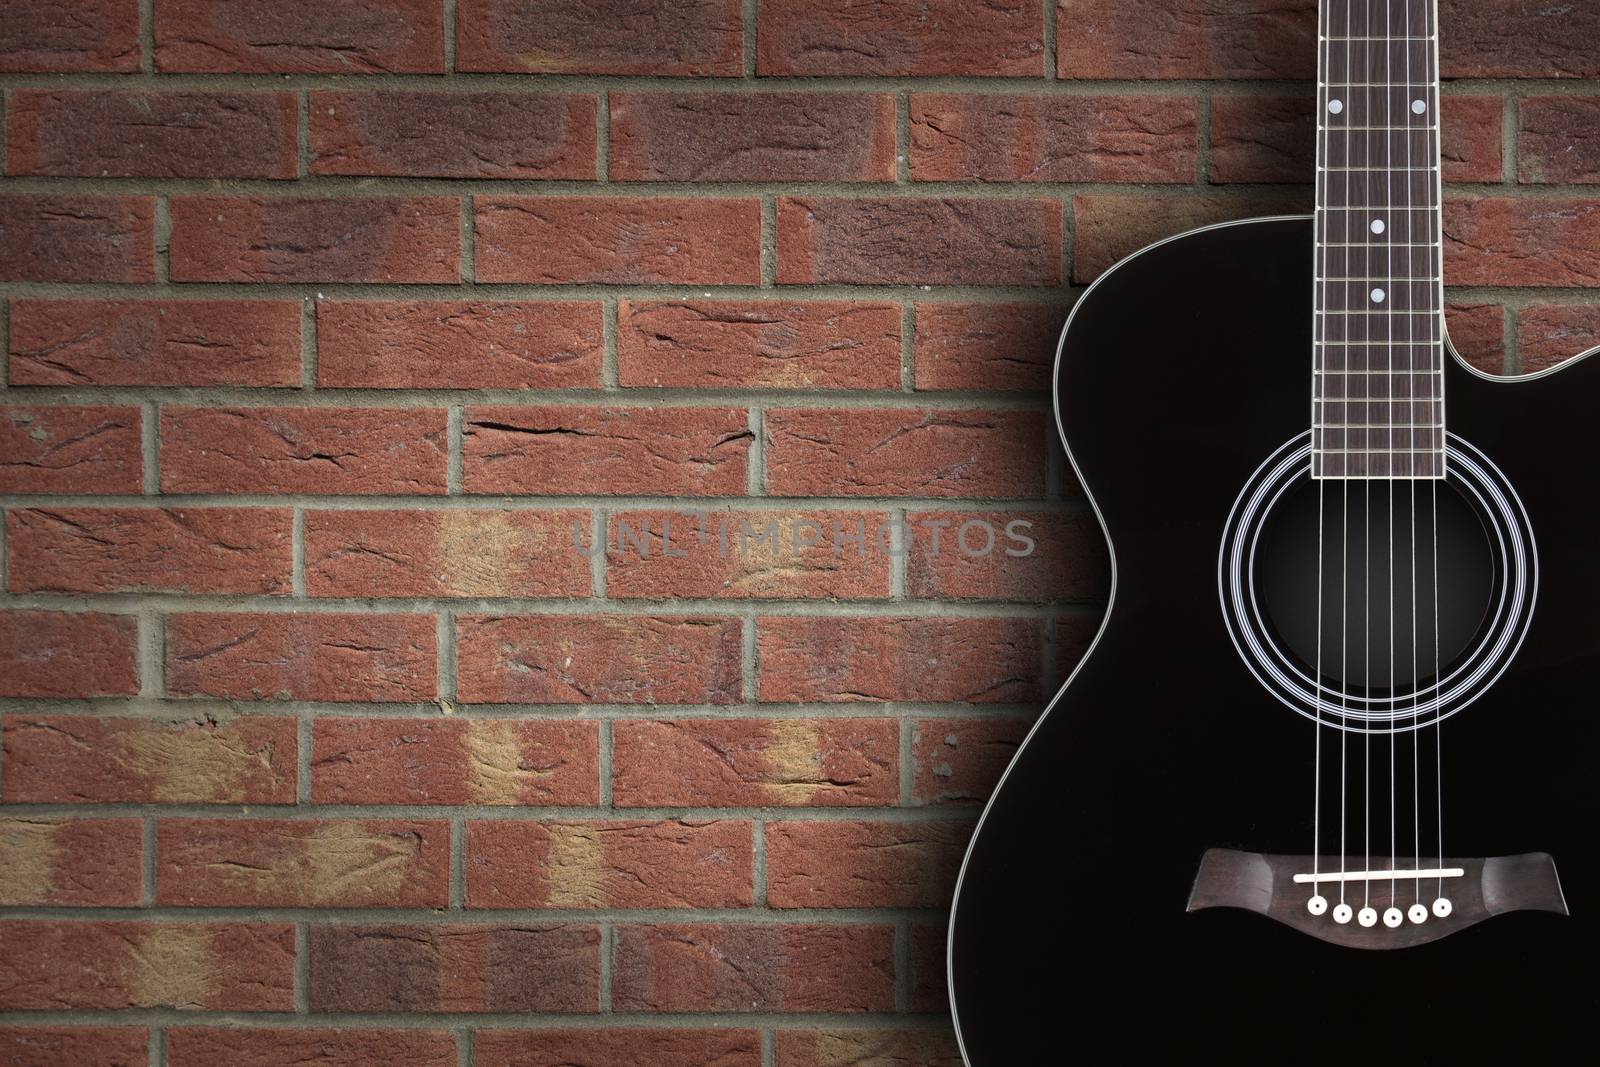 A black acoustic guitar on brick background with copy space